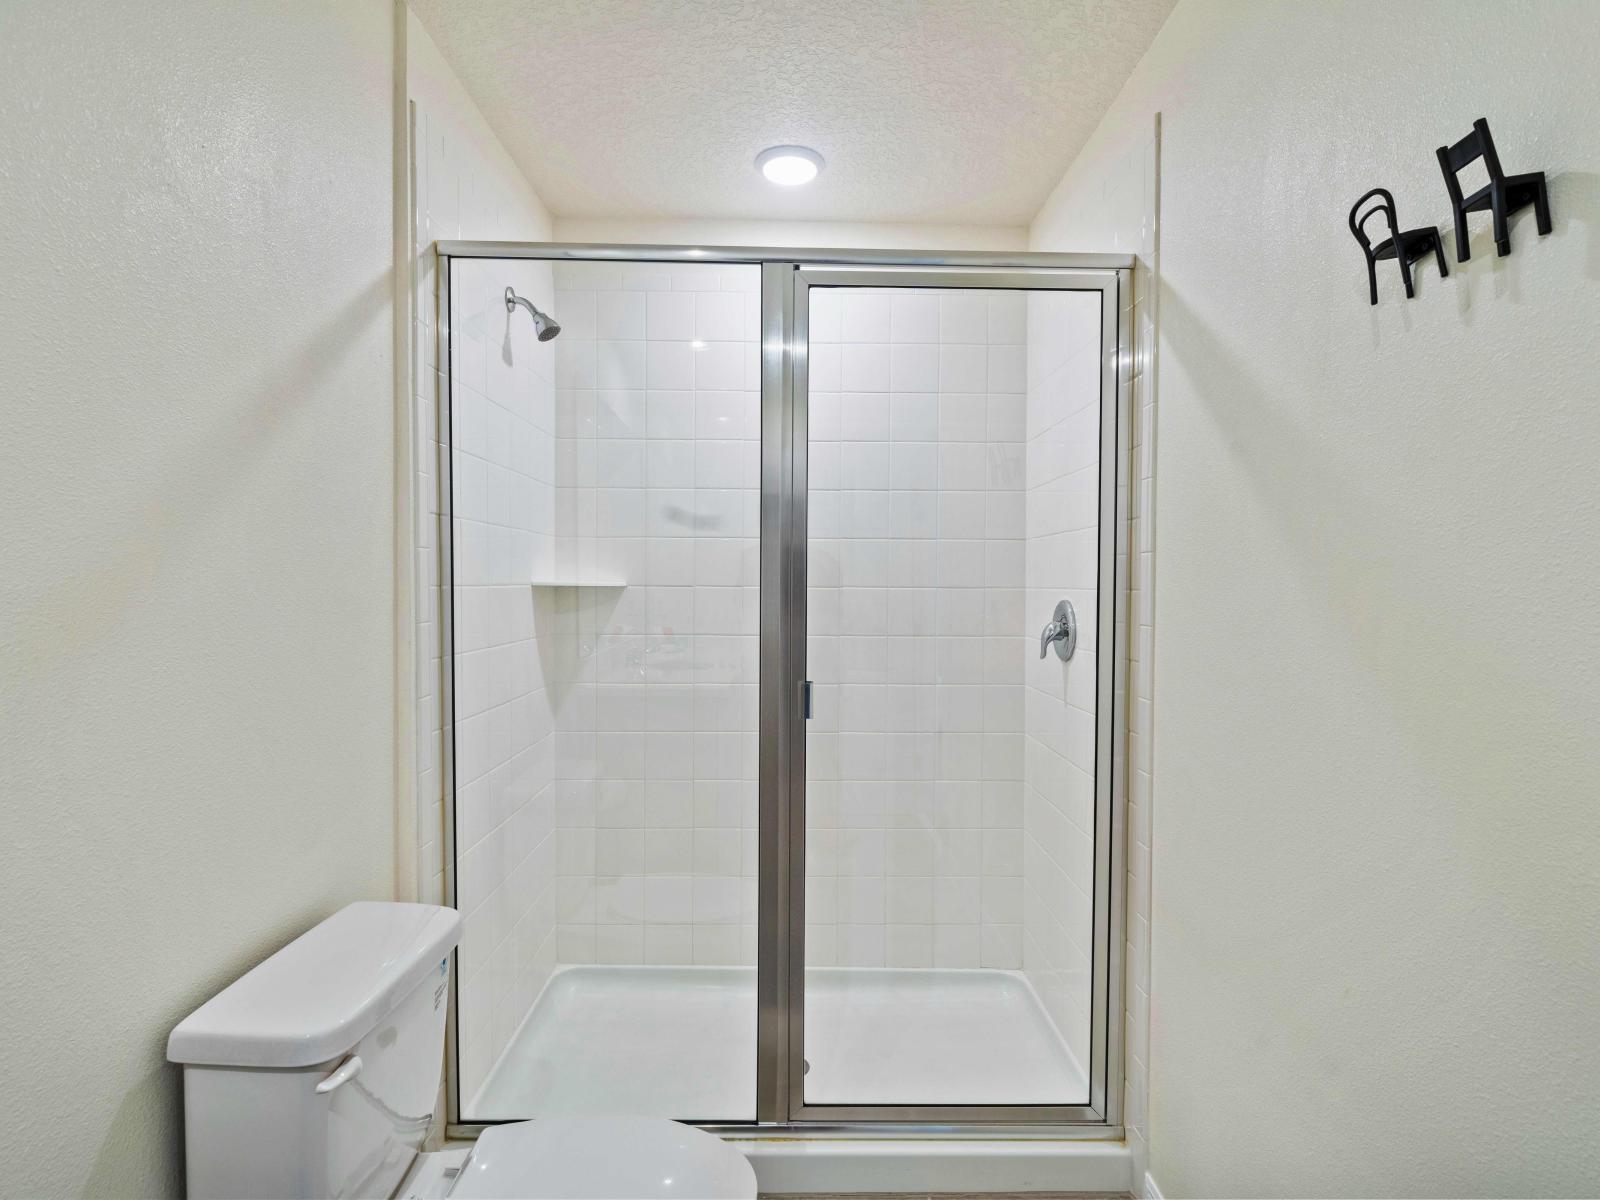 Bathroom 3 with a walk-in shower